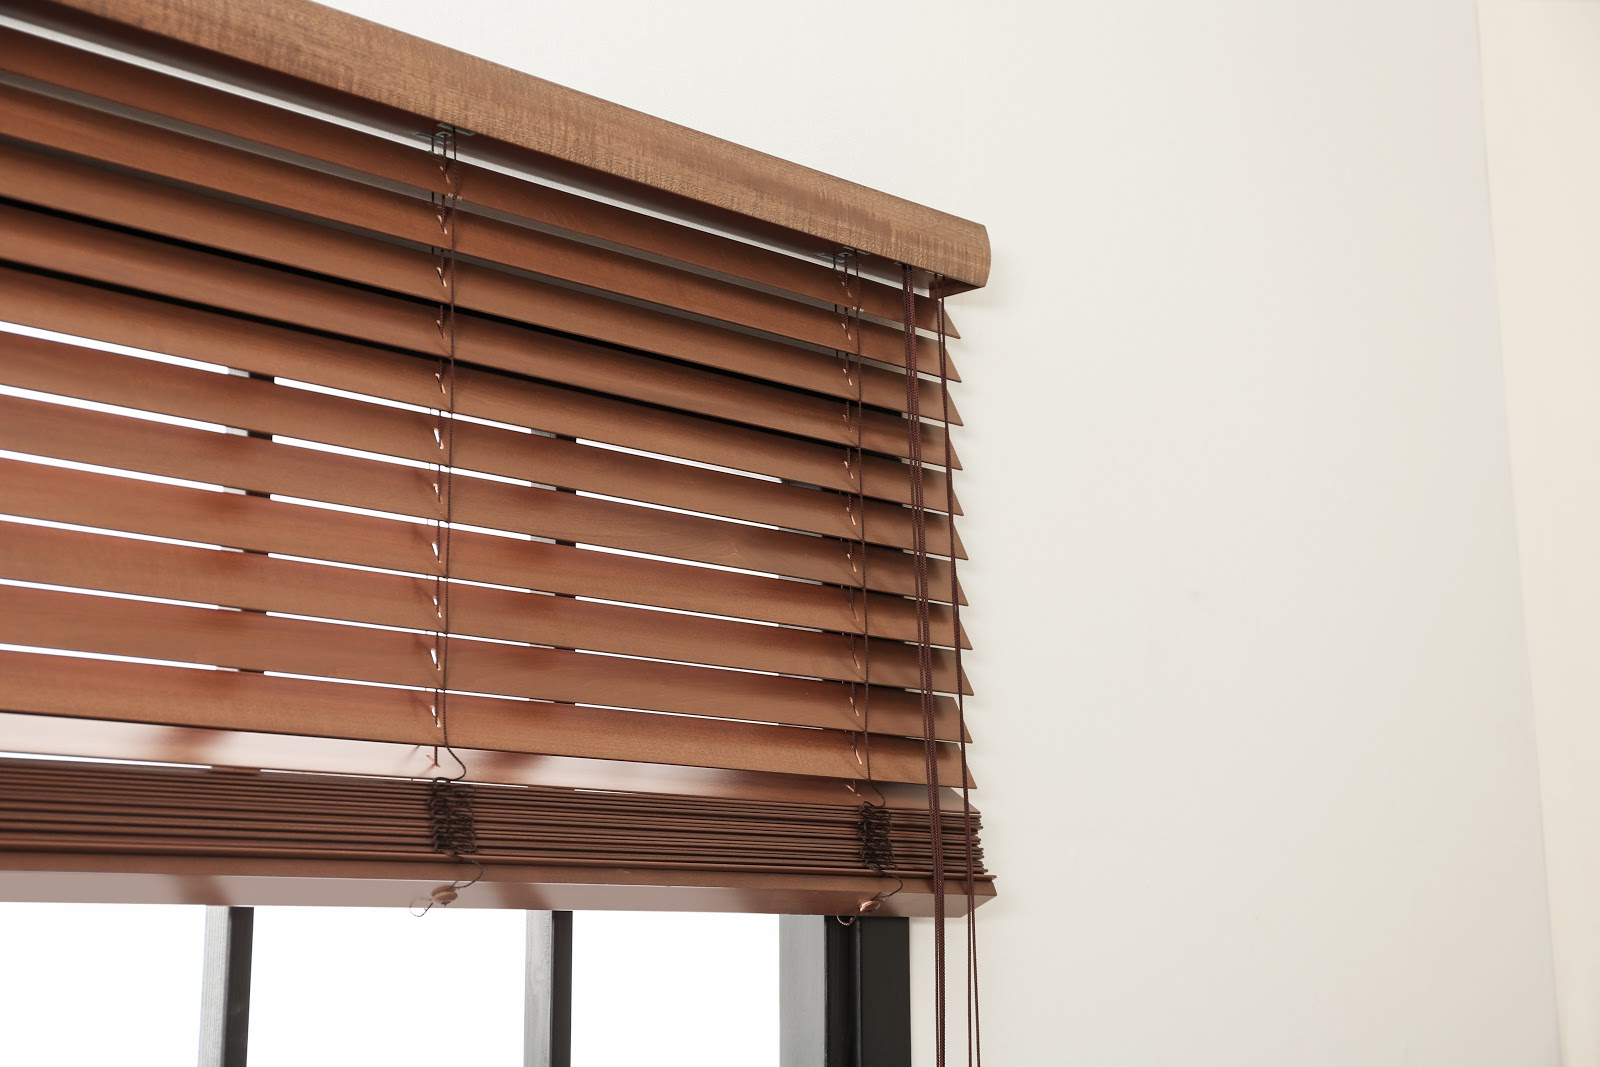 Clean your wooden Venetian blinds using furniture polish